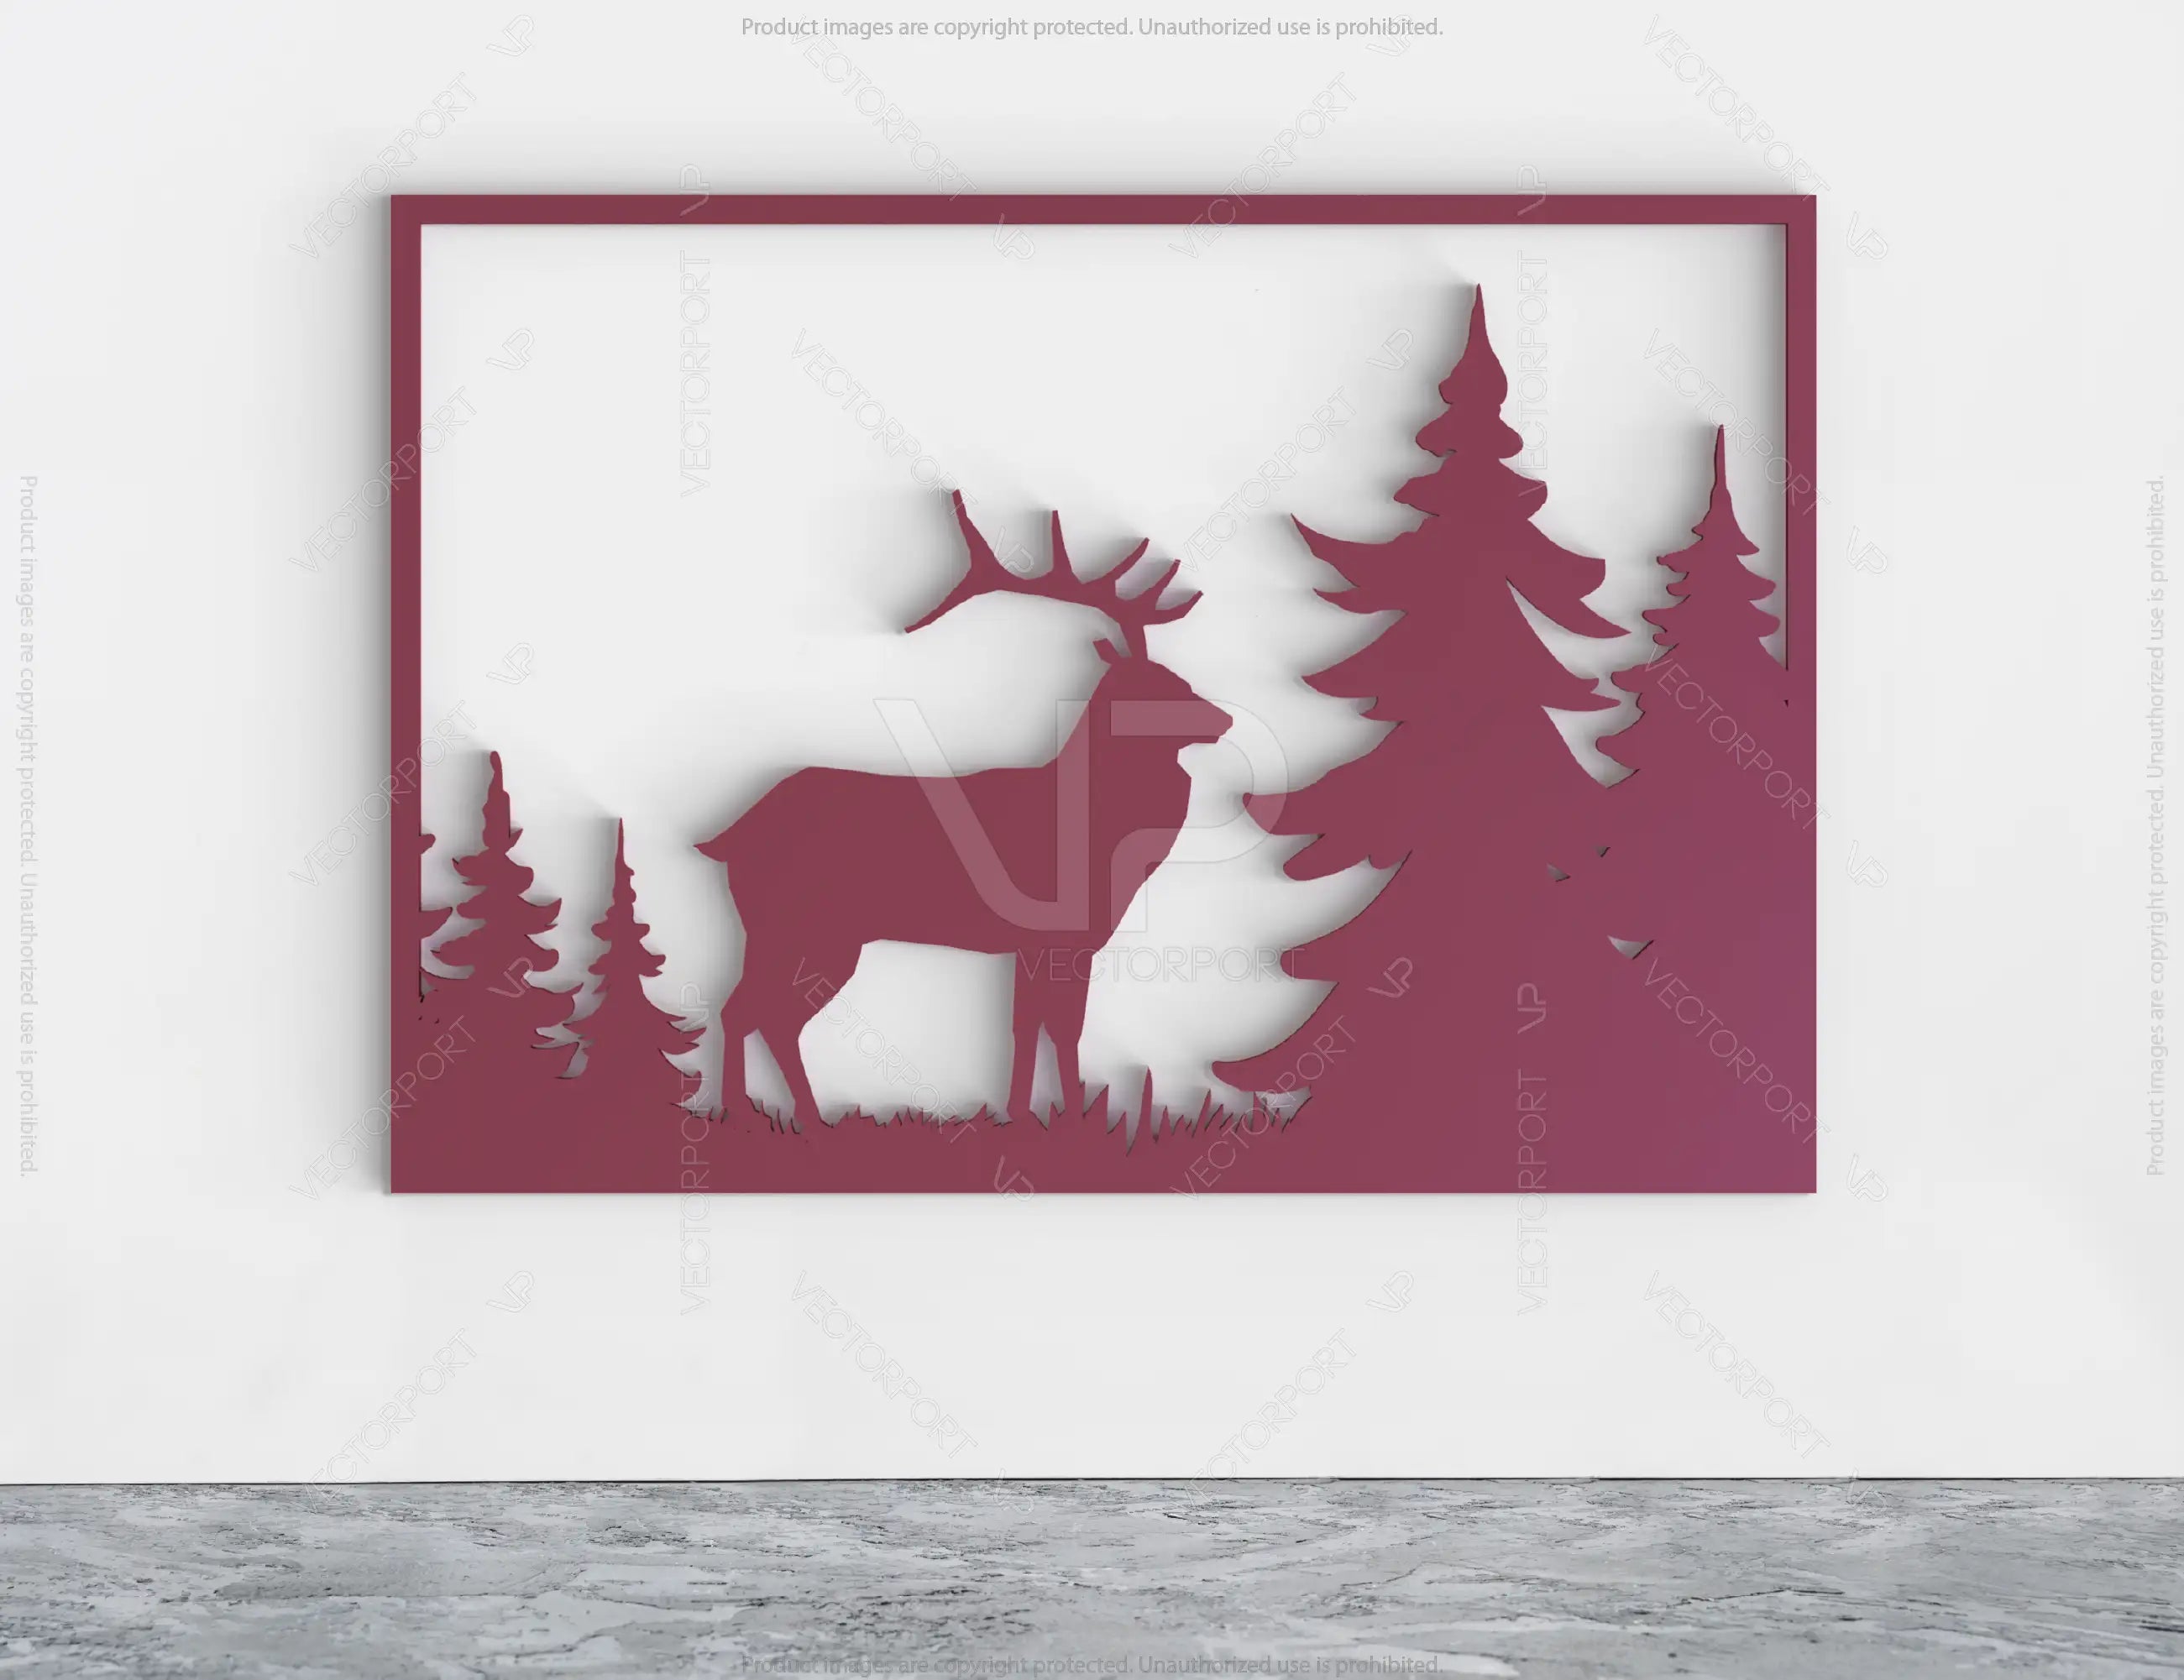 6 Wildlife scenes with animals 3D models and vector files. | SVG, DXF, AI |#025|